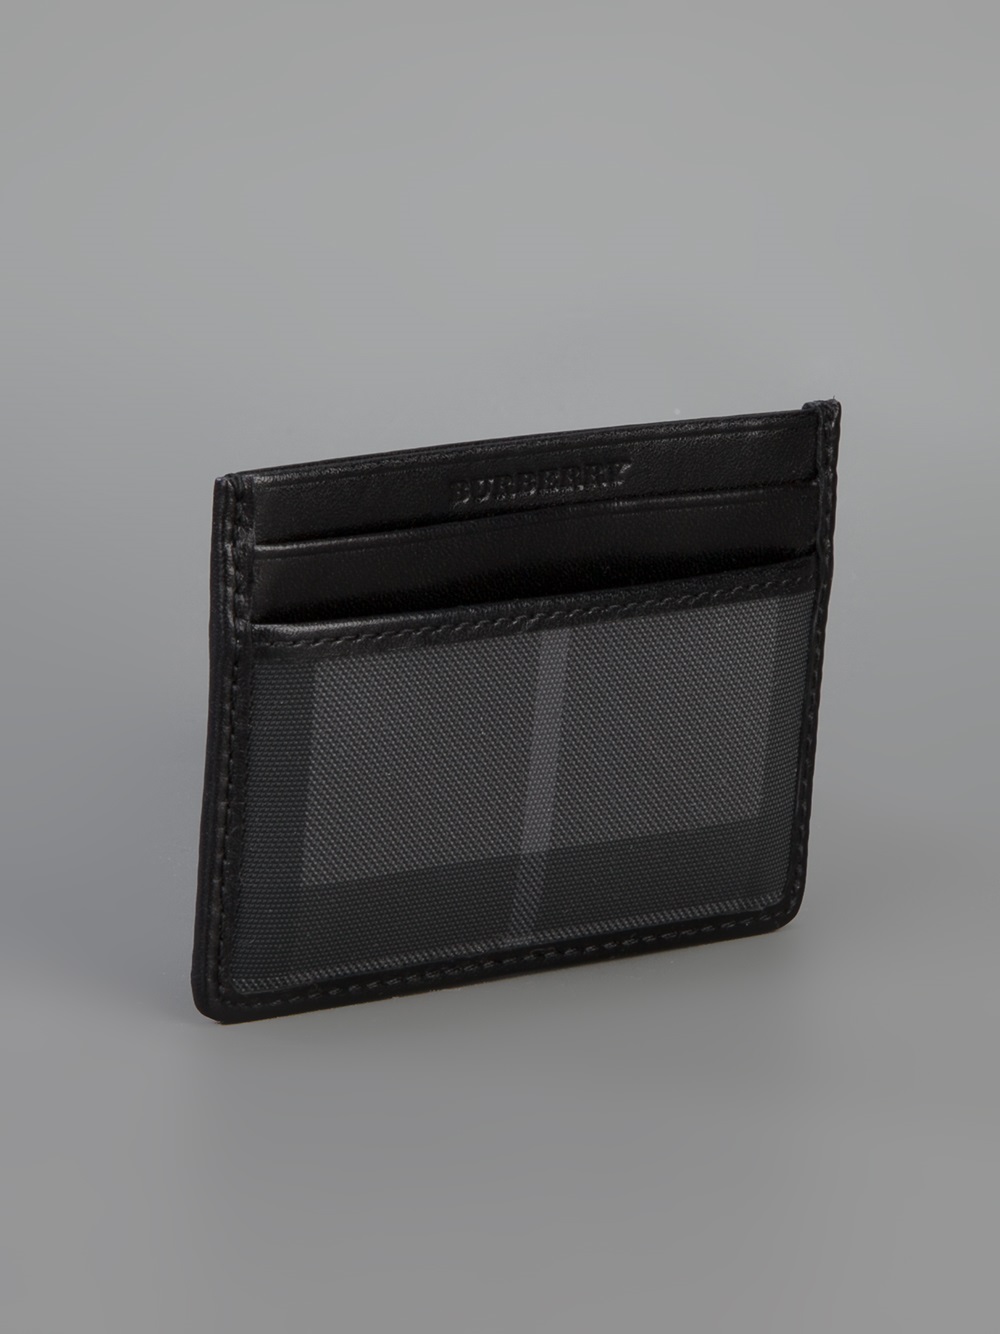 Burberry Card Holder - Lyst - Burberry Check Card Holder in Black for